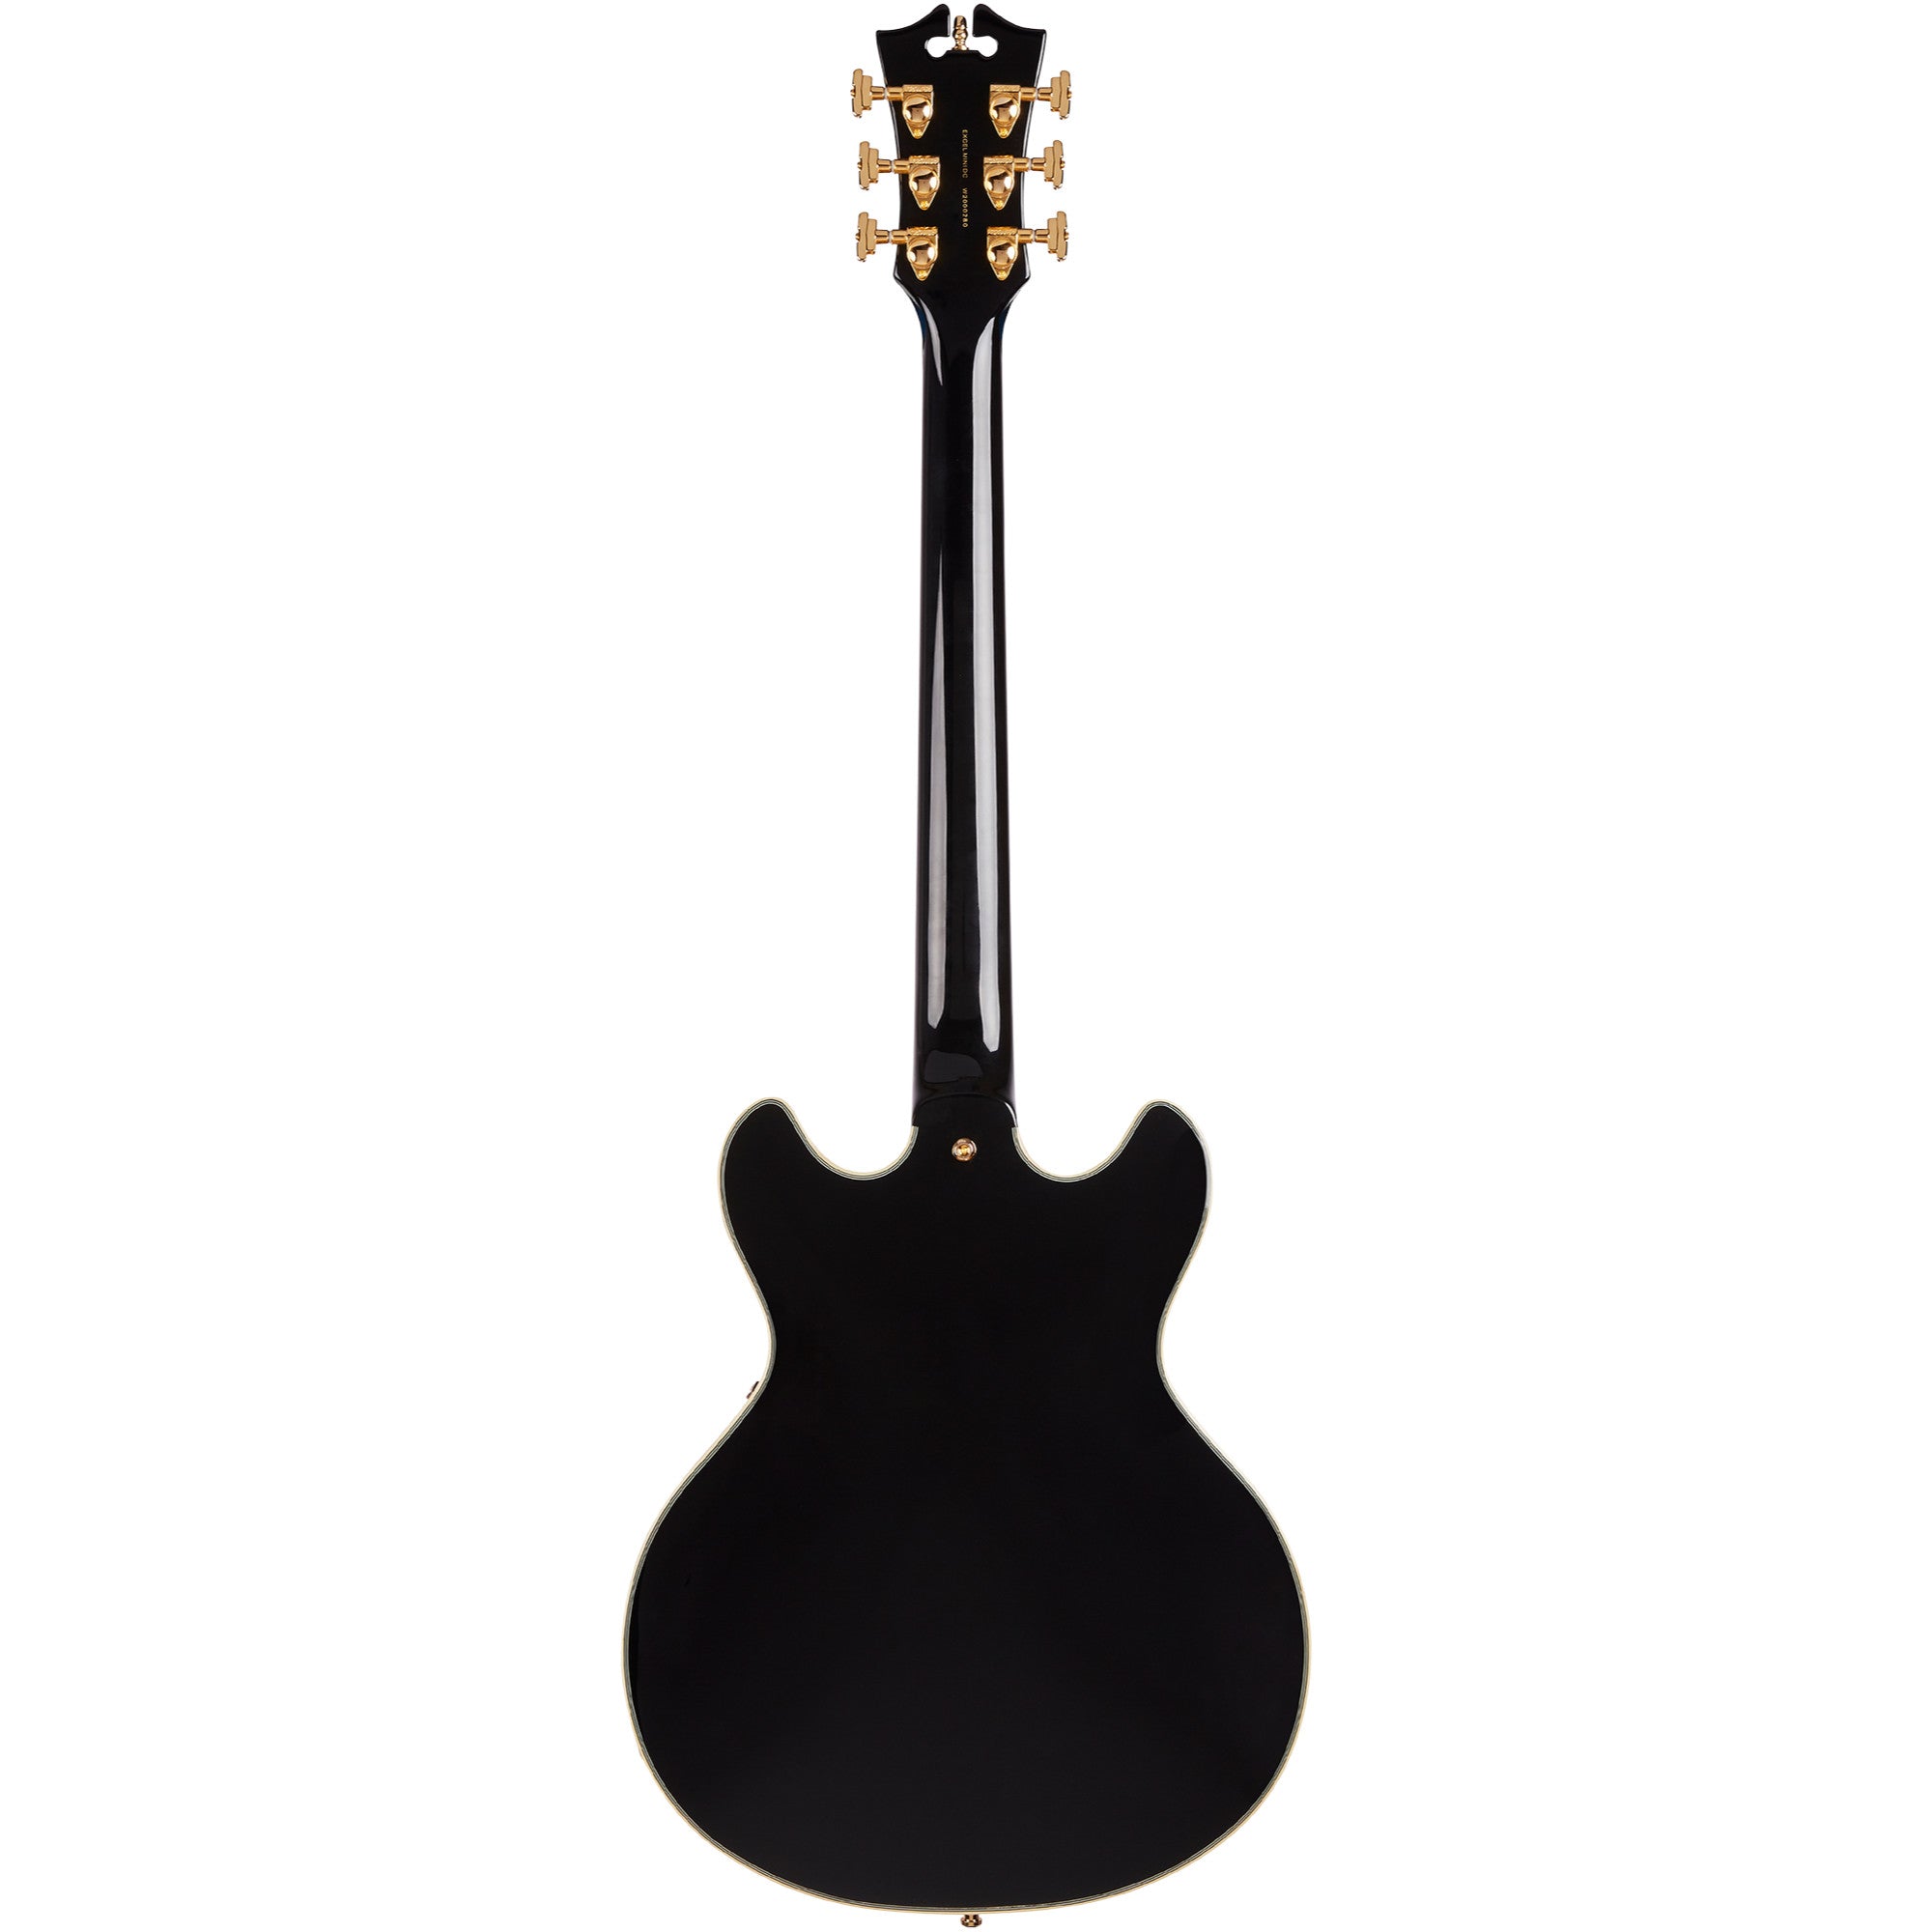 D'Angelico, D'Angelico Excel Mini Double Cutaway with Stop-Bar Tailpiece, Black